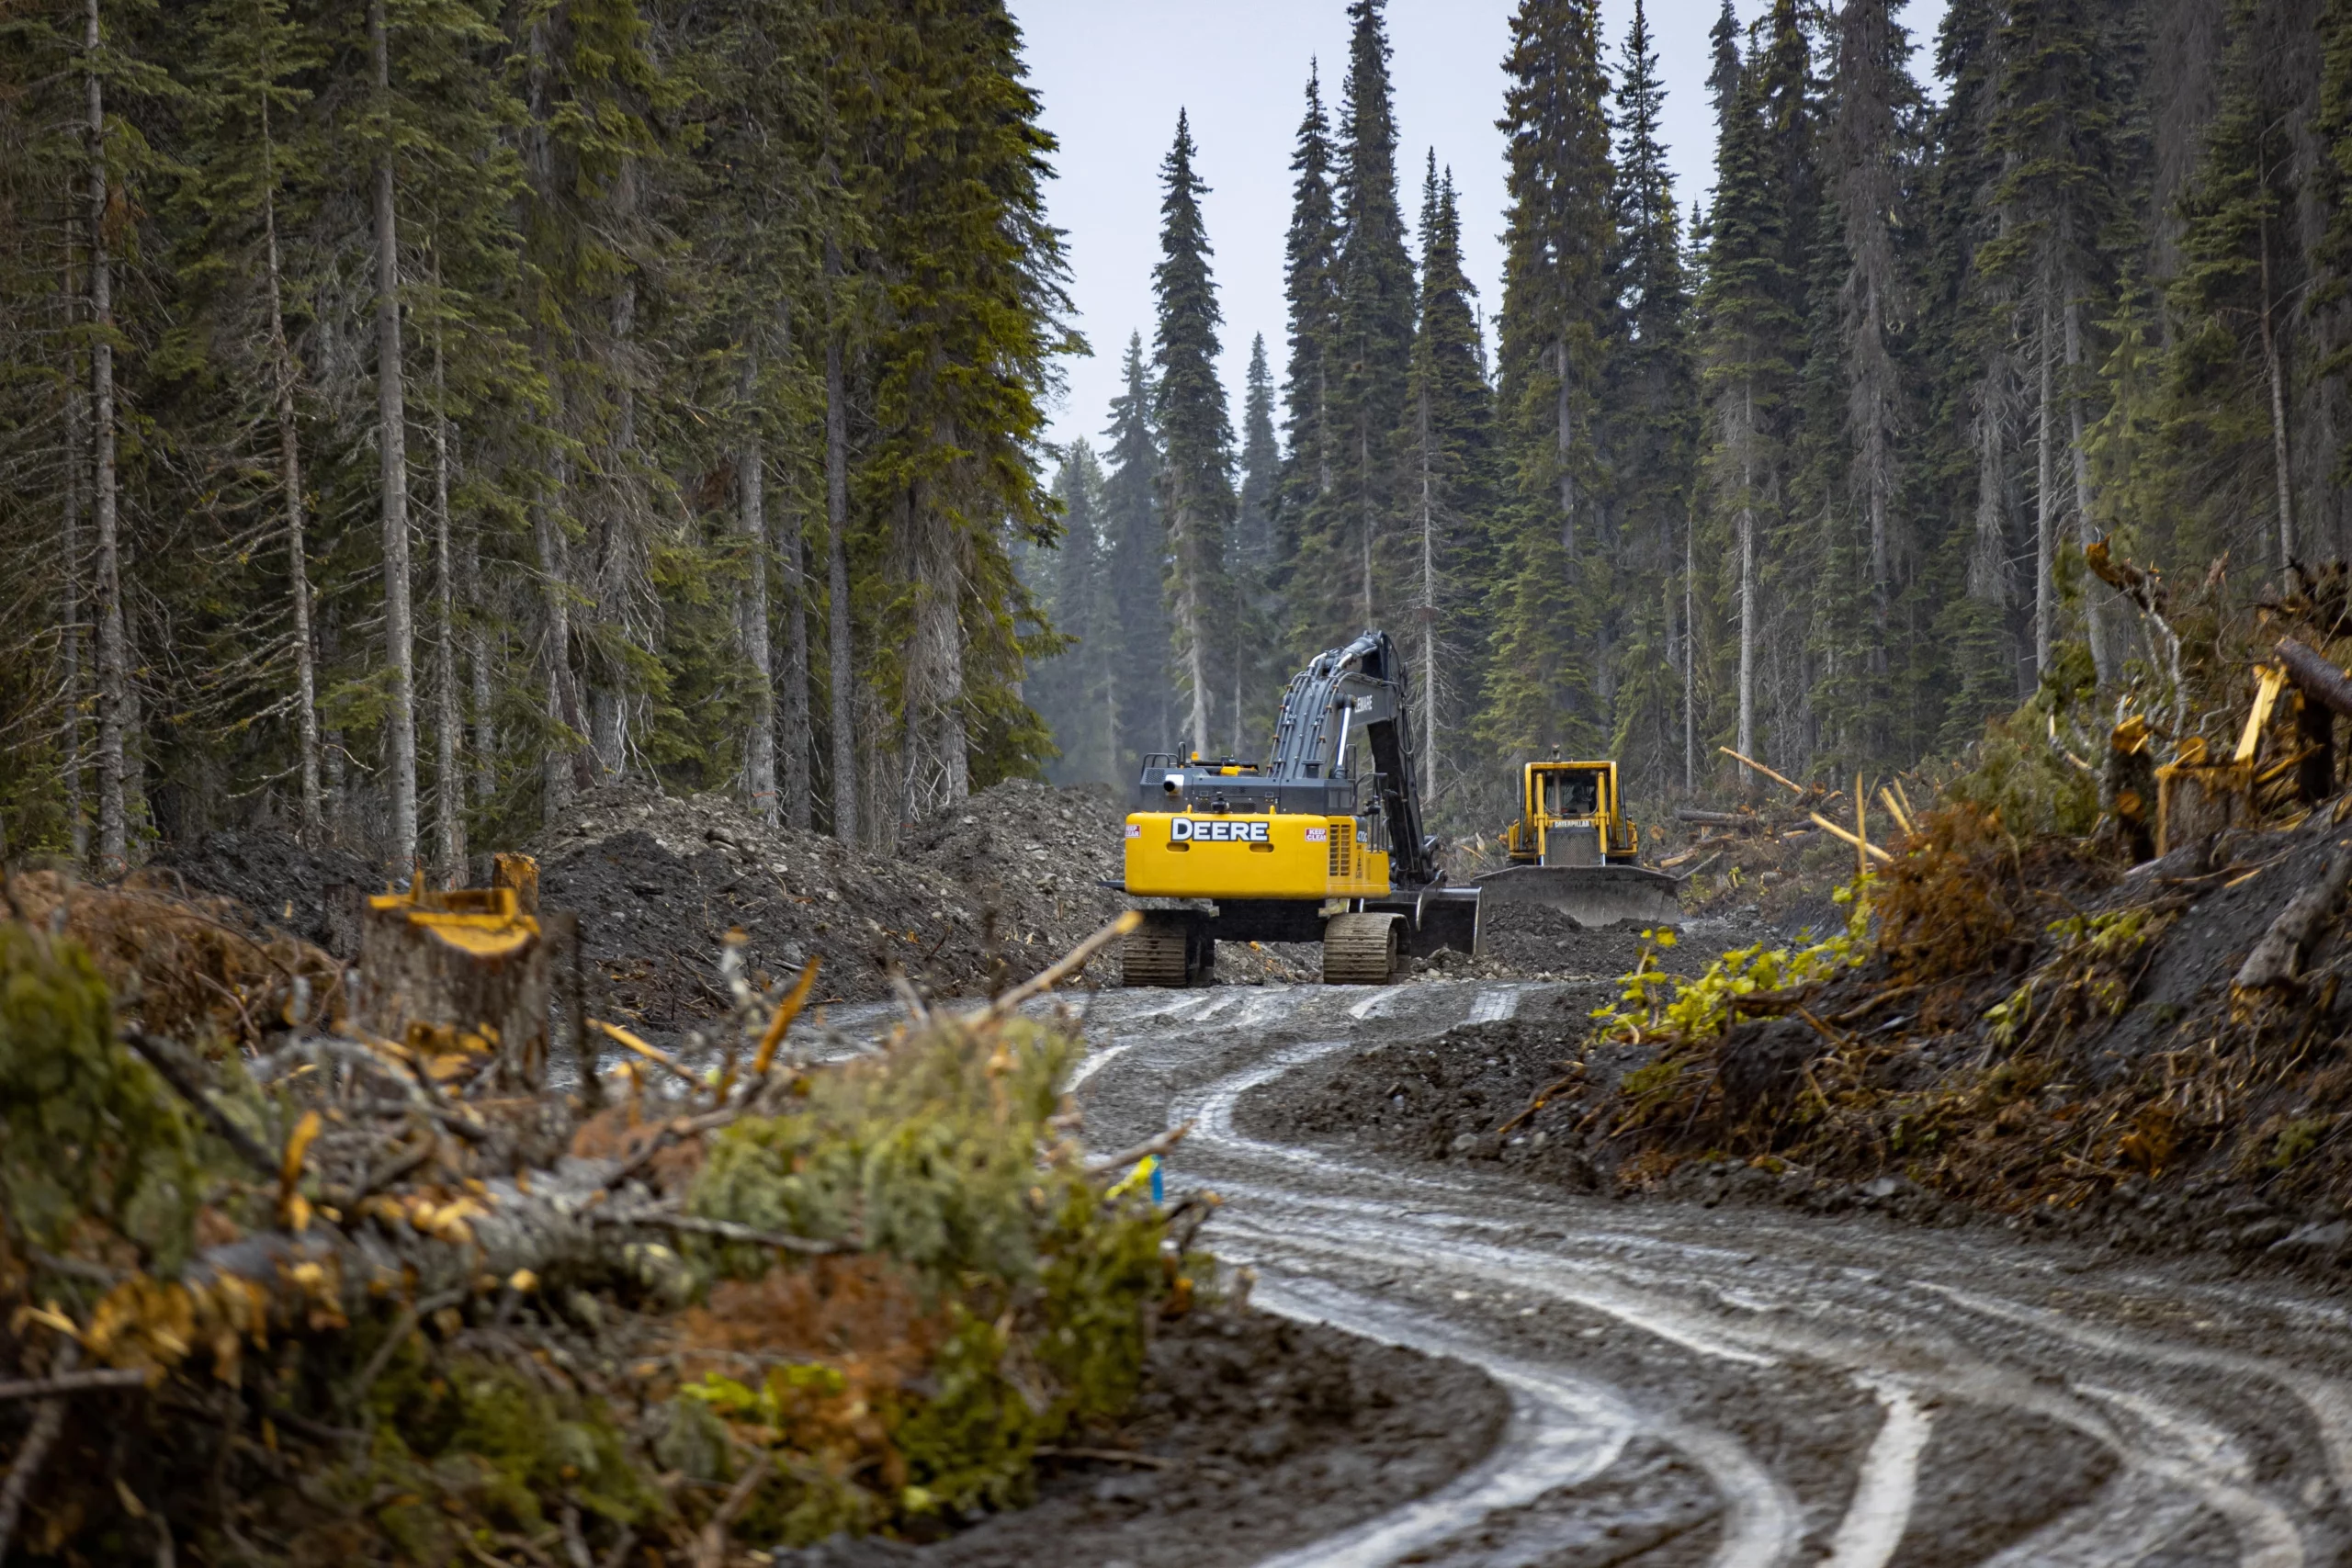 Construction of the Coulter Creek Access Road